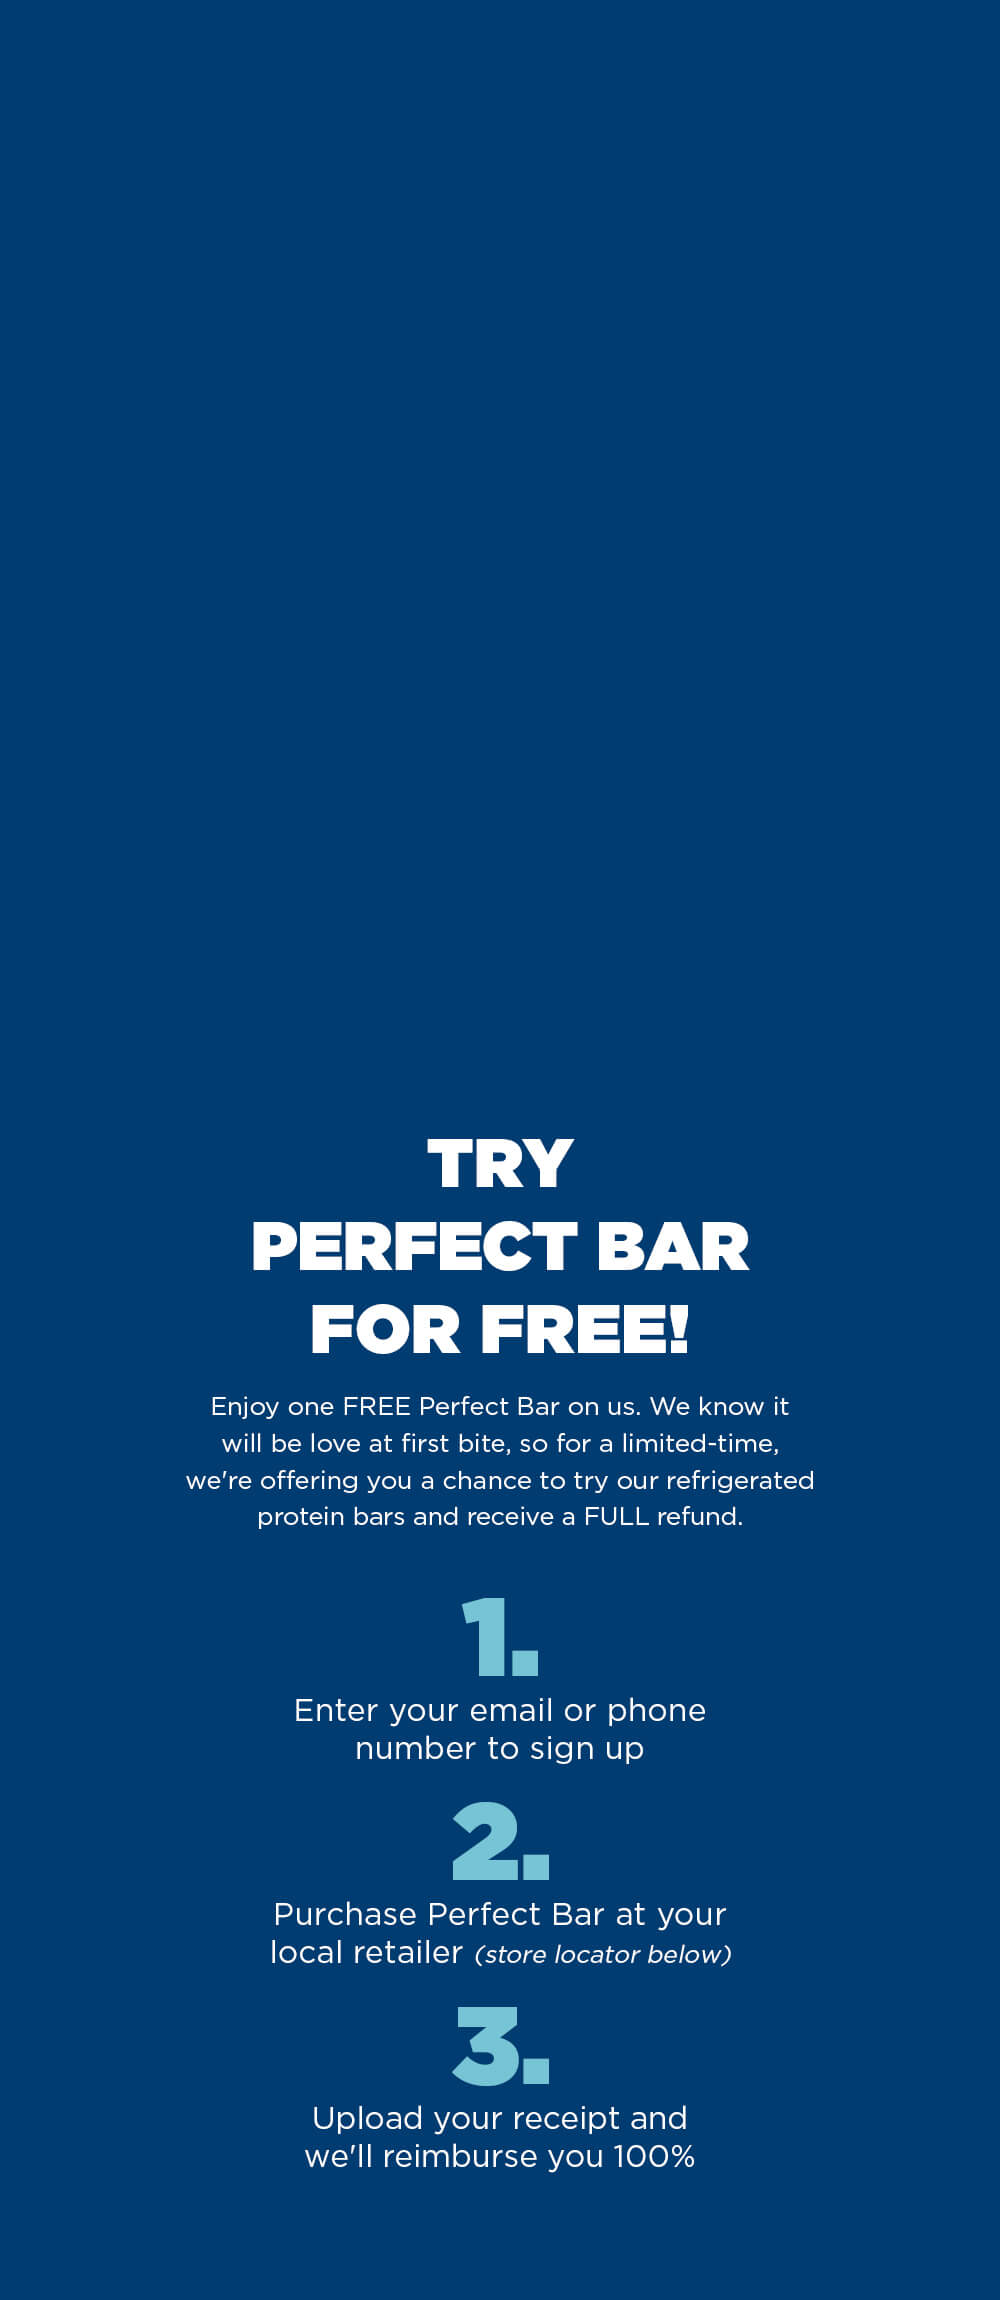 One FREE Perfect Bar on us! – Perfect Snacks